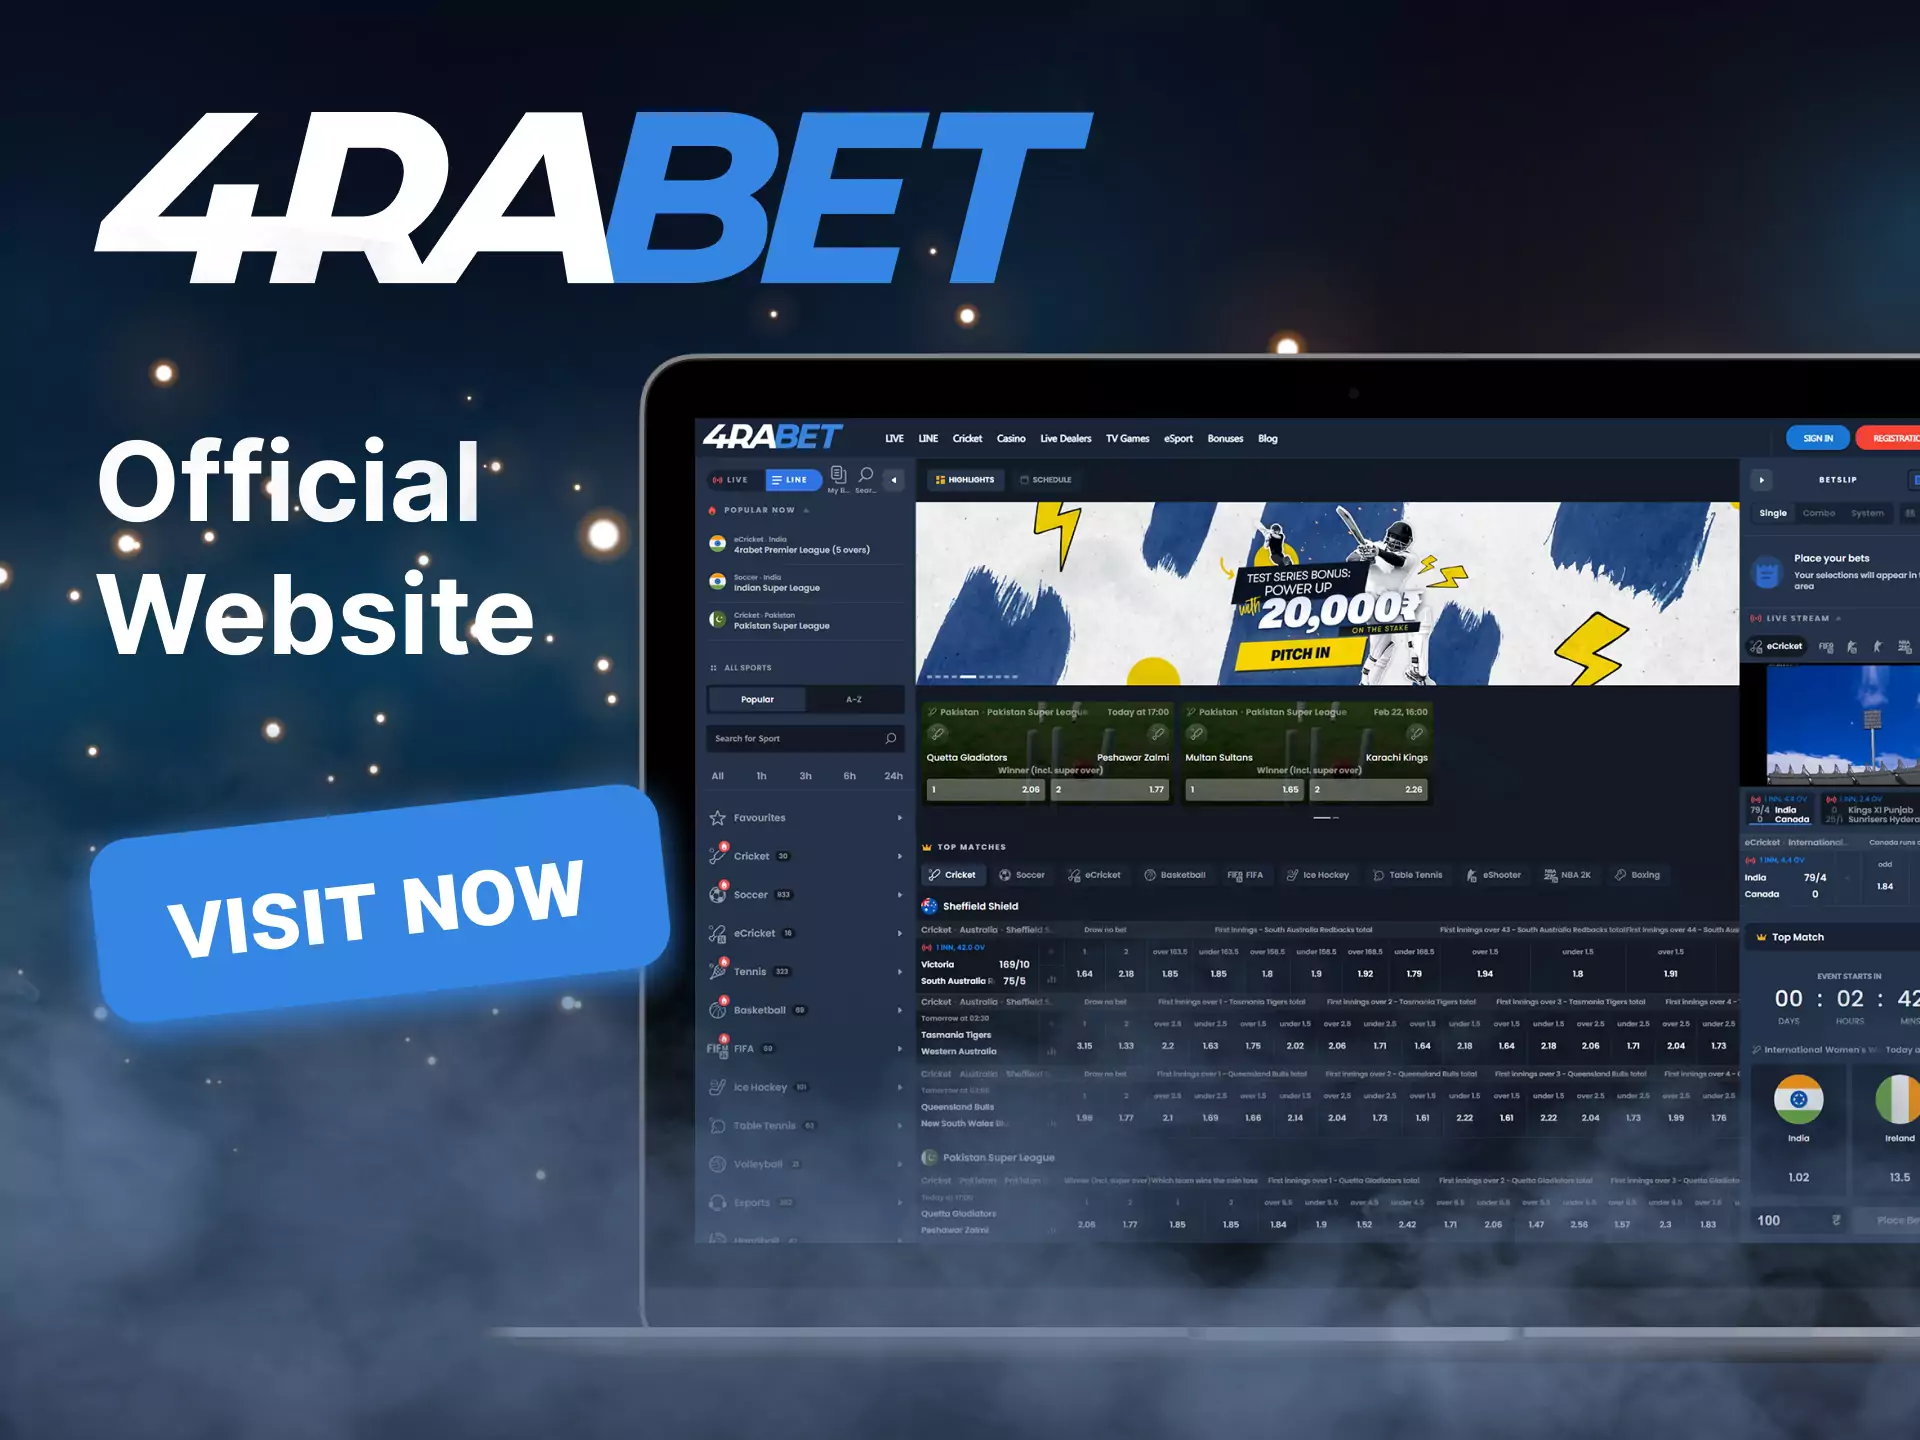 Visit the official website 4rabet, there is a handy interface and full functionality, bet with pleasure.